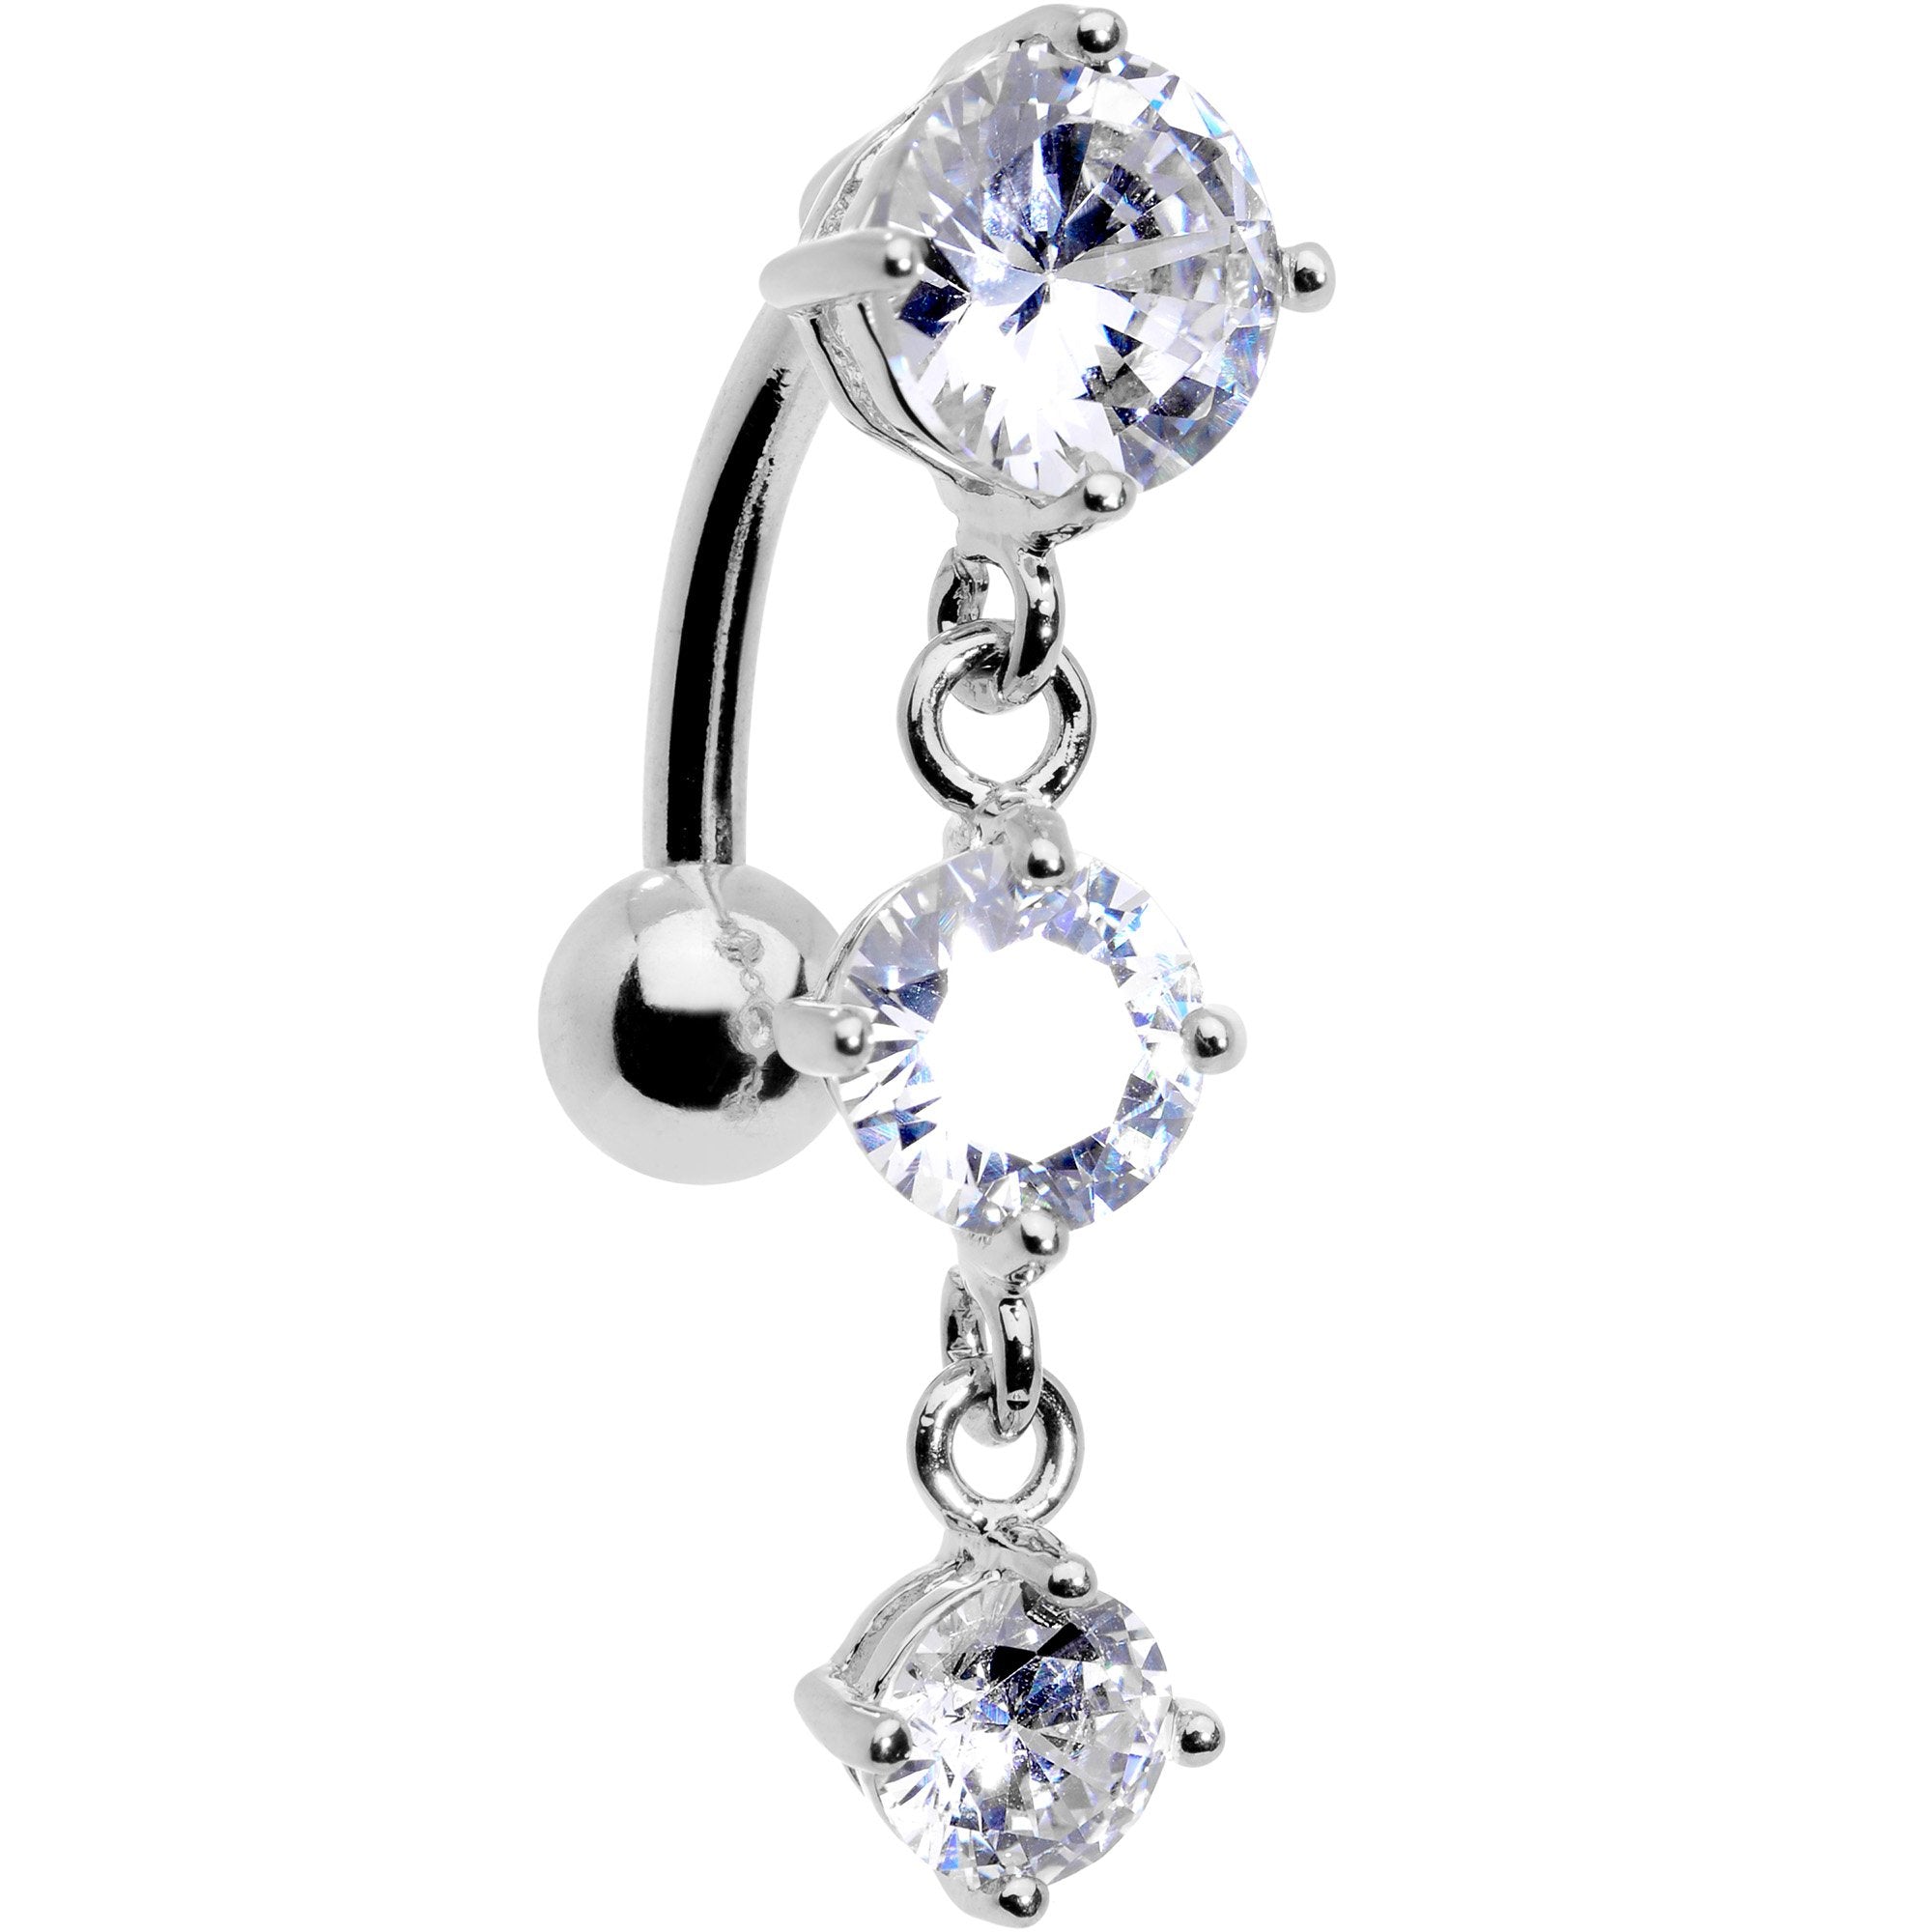 Clear CZ Gem Trio Tier Top Mount Dangle Belly Ring